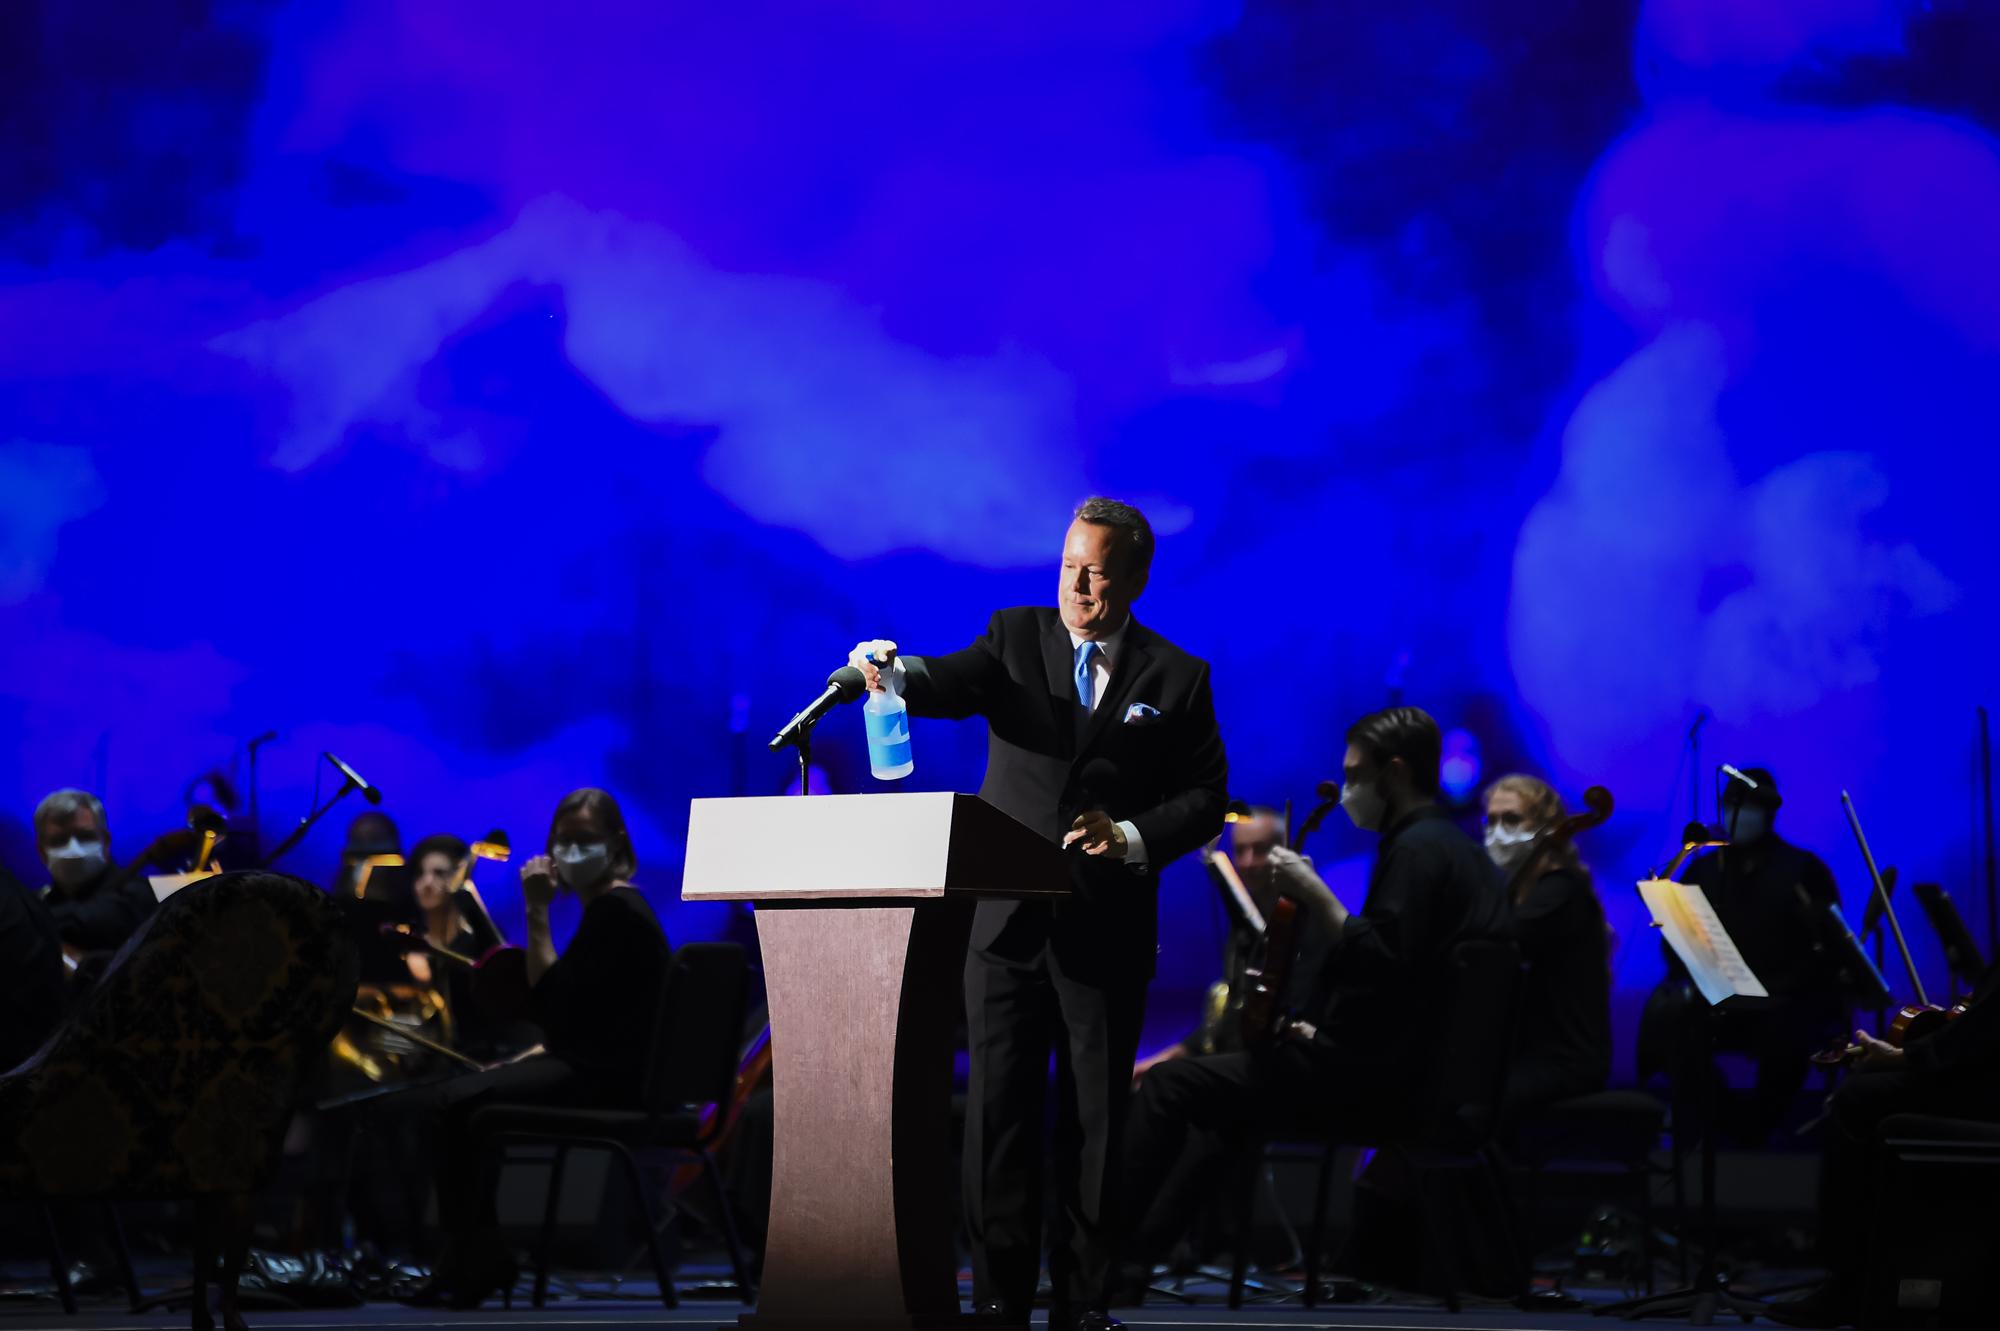 2021 - Palm Beach Opera reopens - The host sanitizes the microphone during the opening...